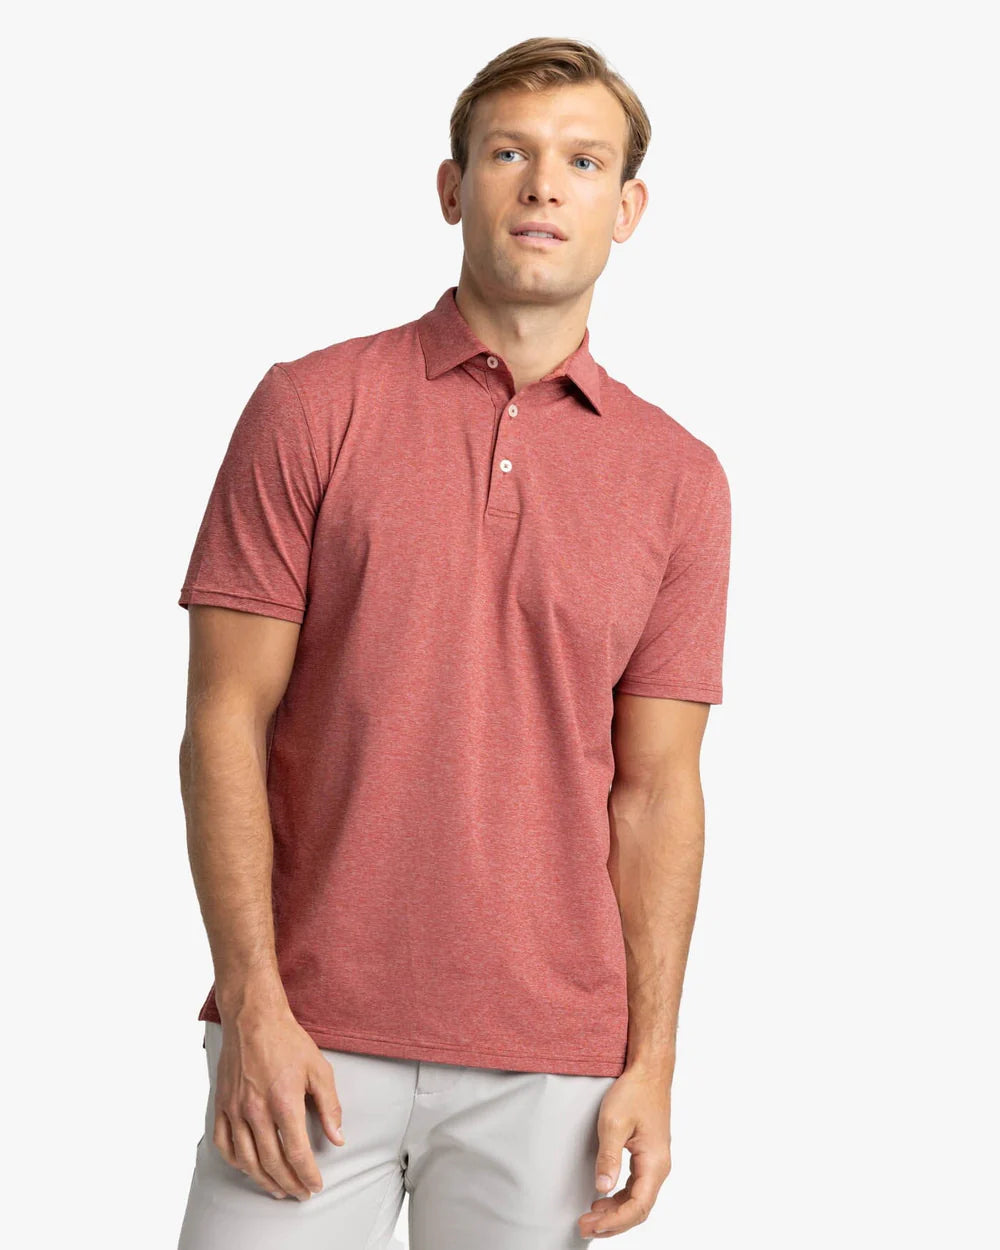 SOUTHERN TIDE Men's Polo HTH RED / M Southern Tide brrr°-eeze Heather Performance Polo Shirt || David's Clothing 103482911